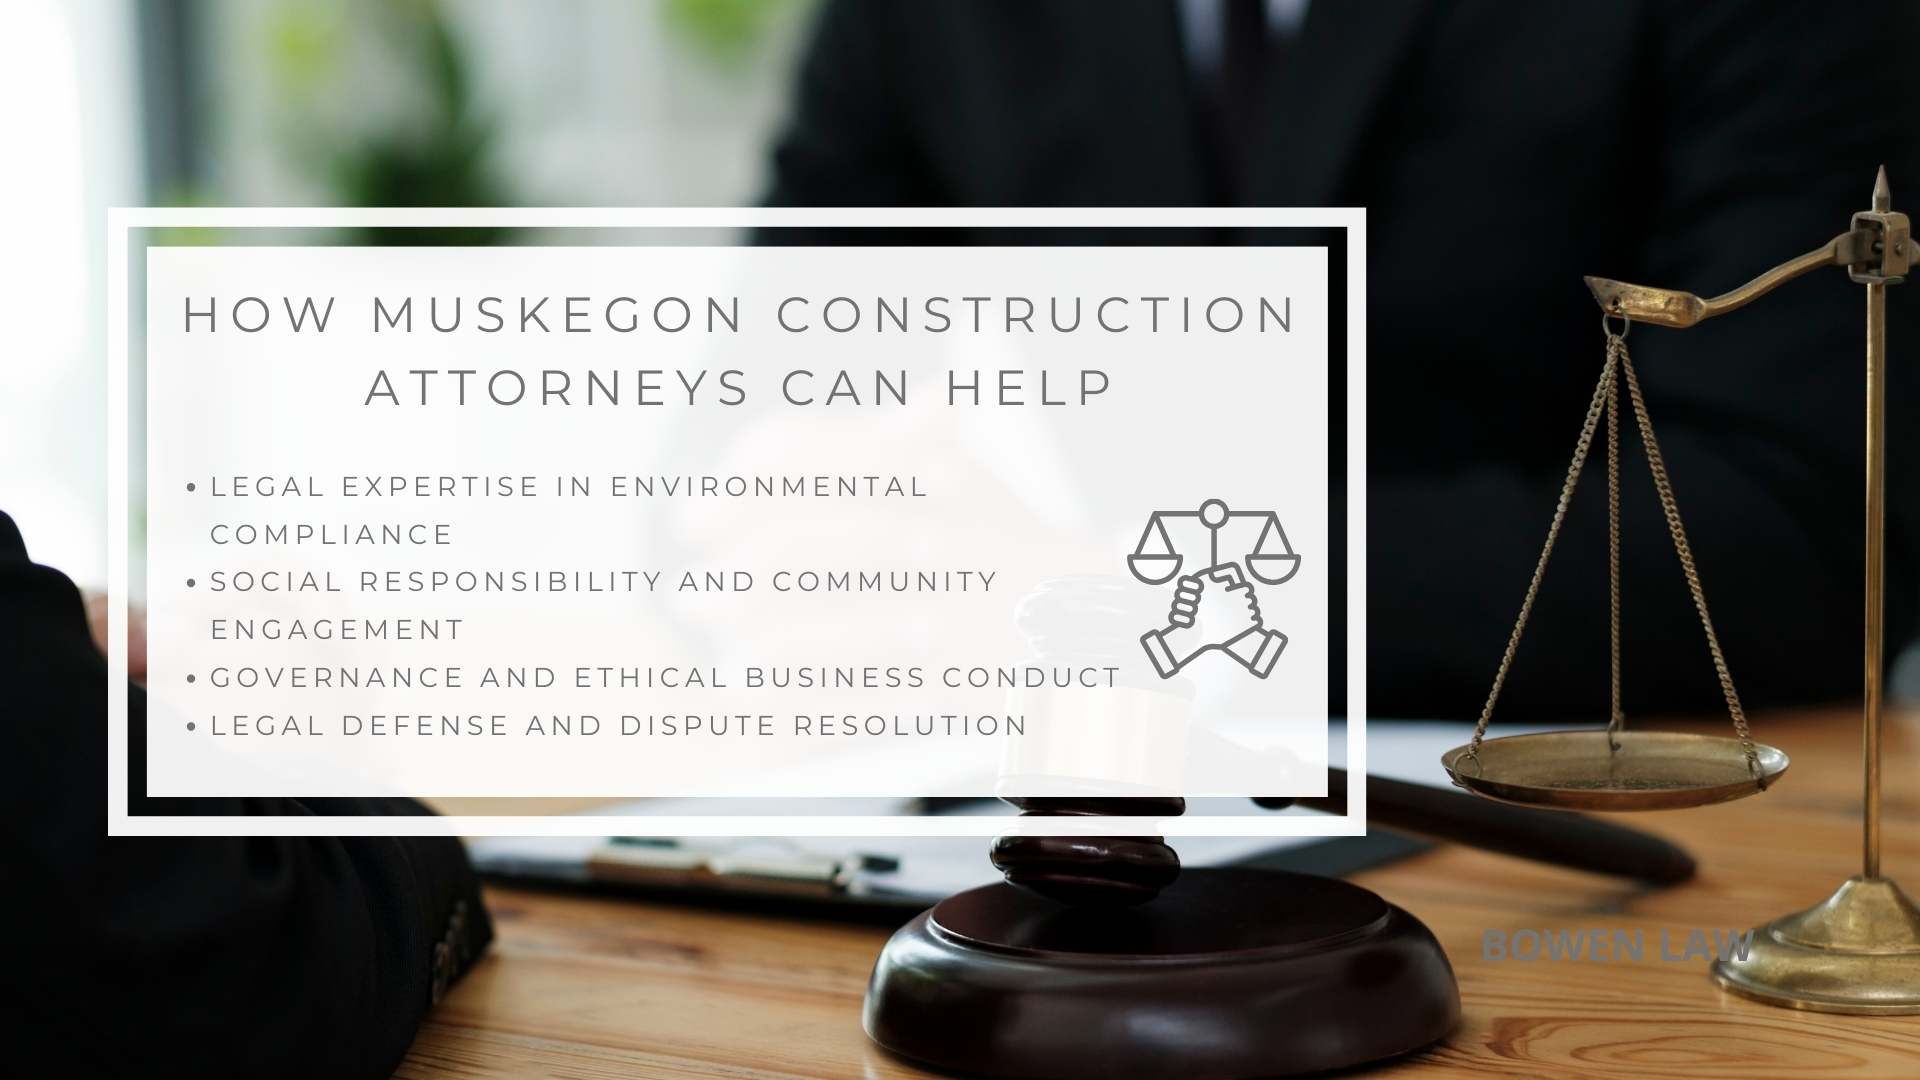 Infographic image of how Muskegon construction attorneys can help